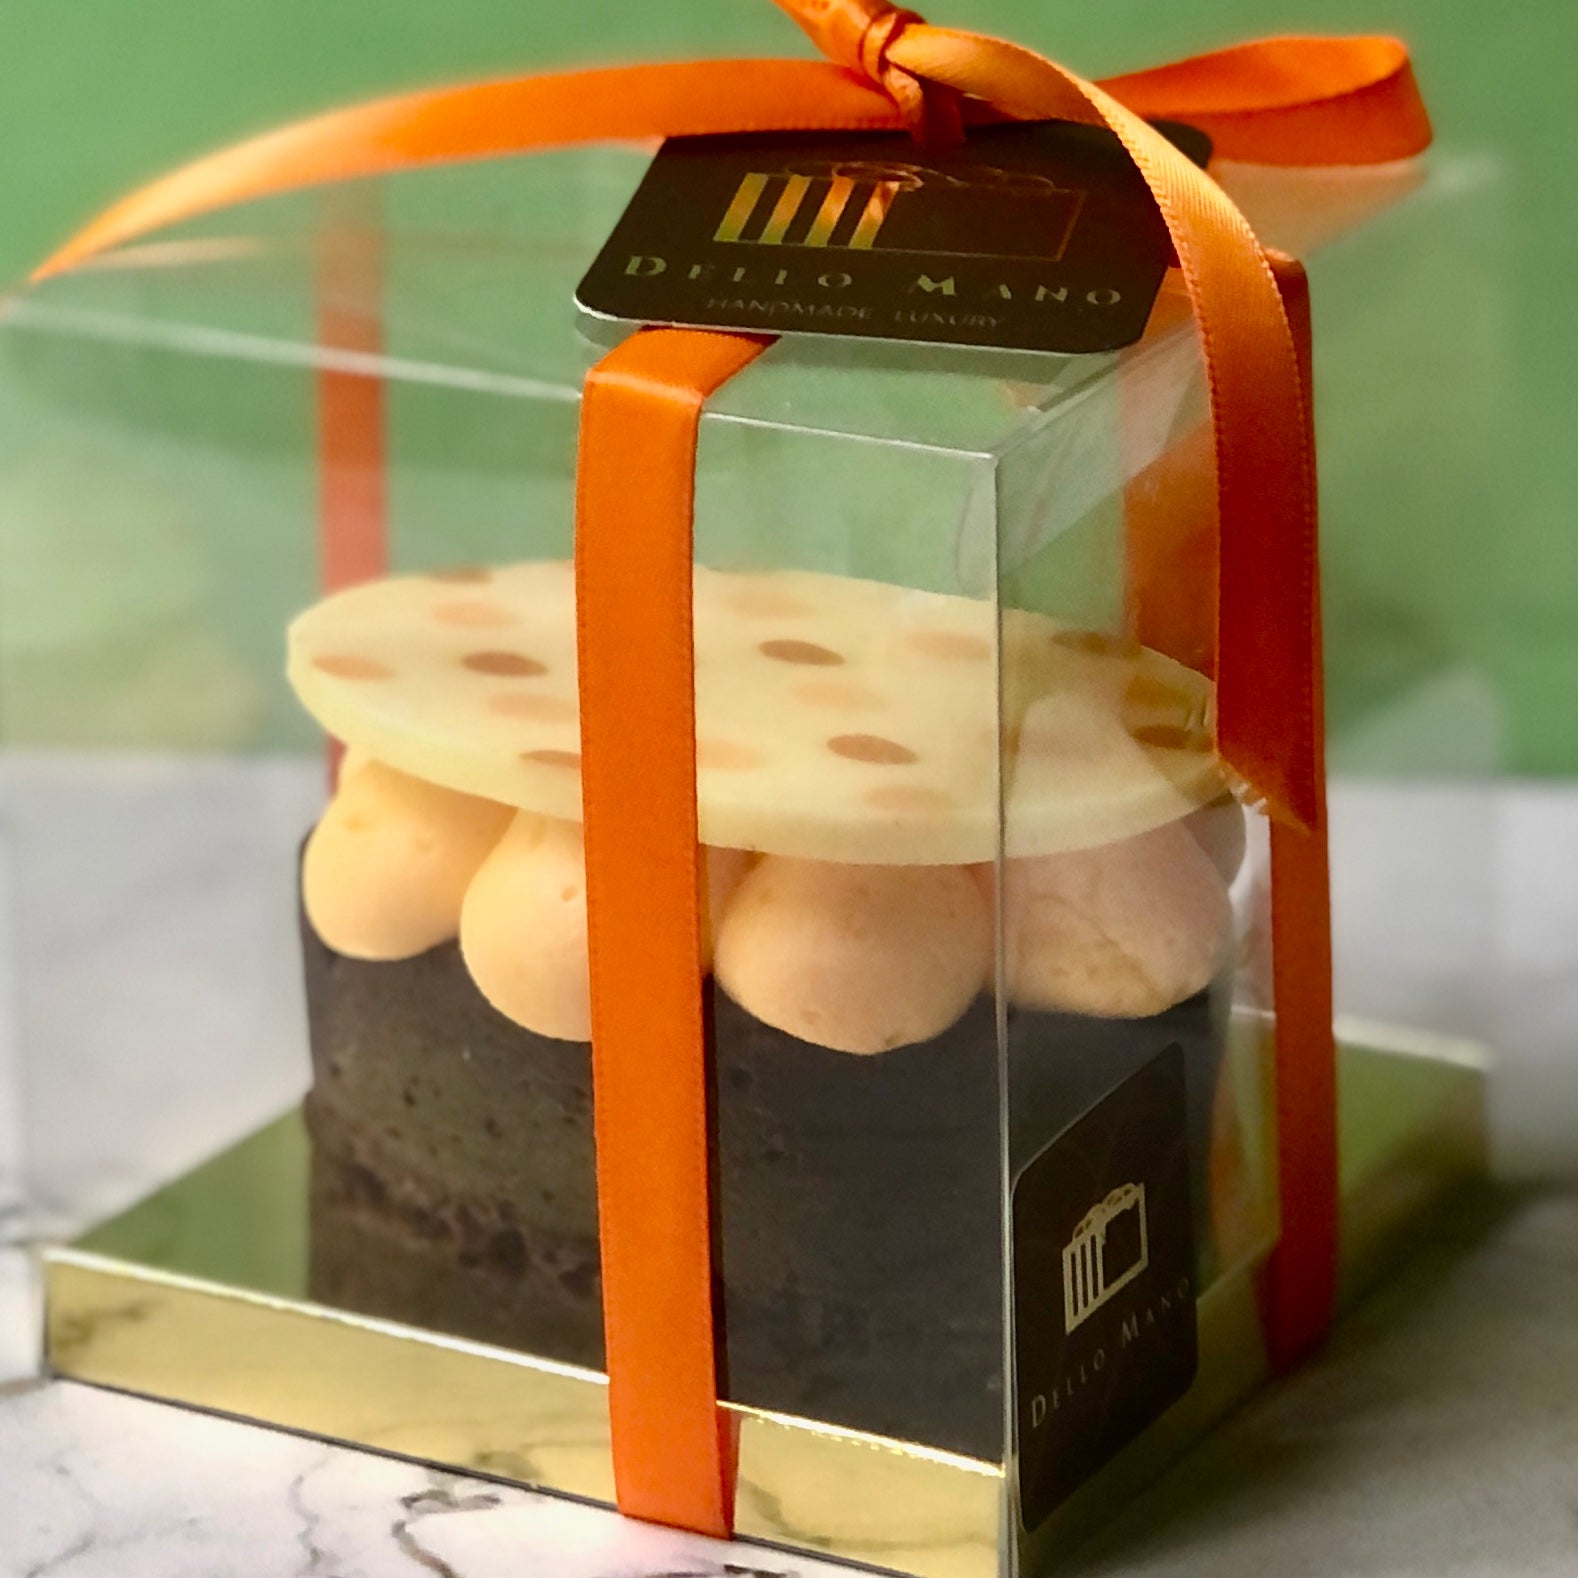 The side view of a brownie easter egg gift box. A clear gift box with an easter egg shaped brownie topped with apricot coloured butter cream and finished with white chocolate spotted top.